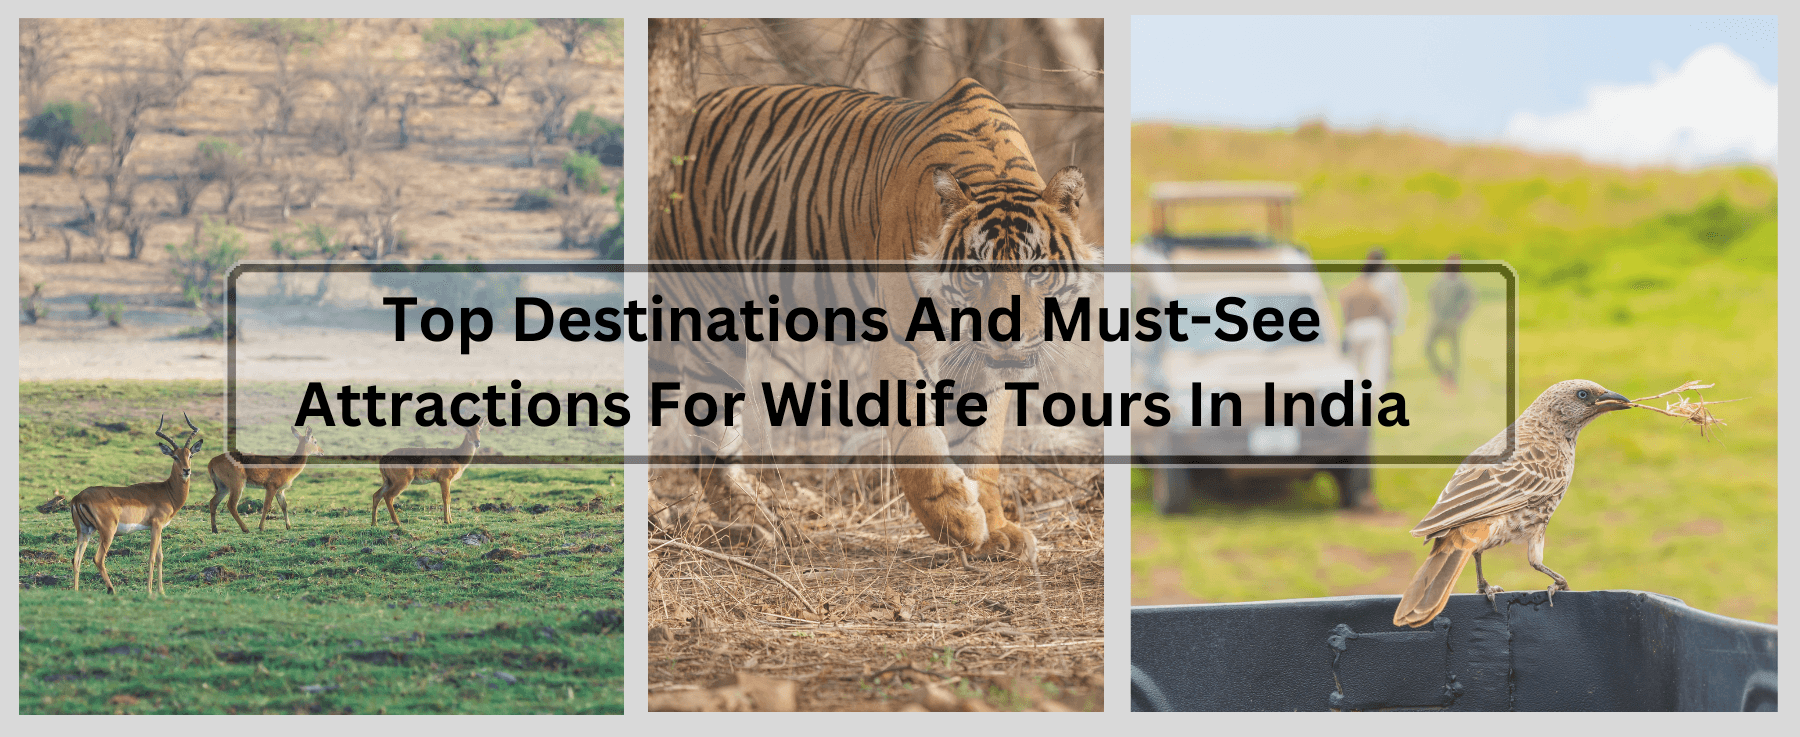 Top Destinations And Must-See Attractions For Wildlife Tours In India